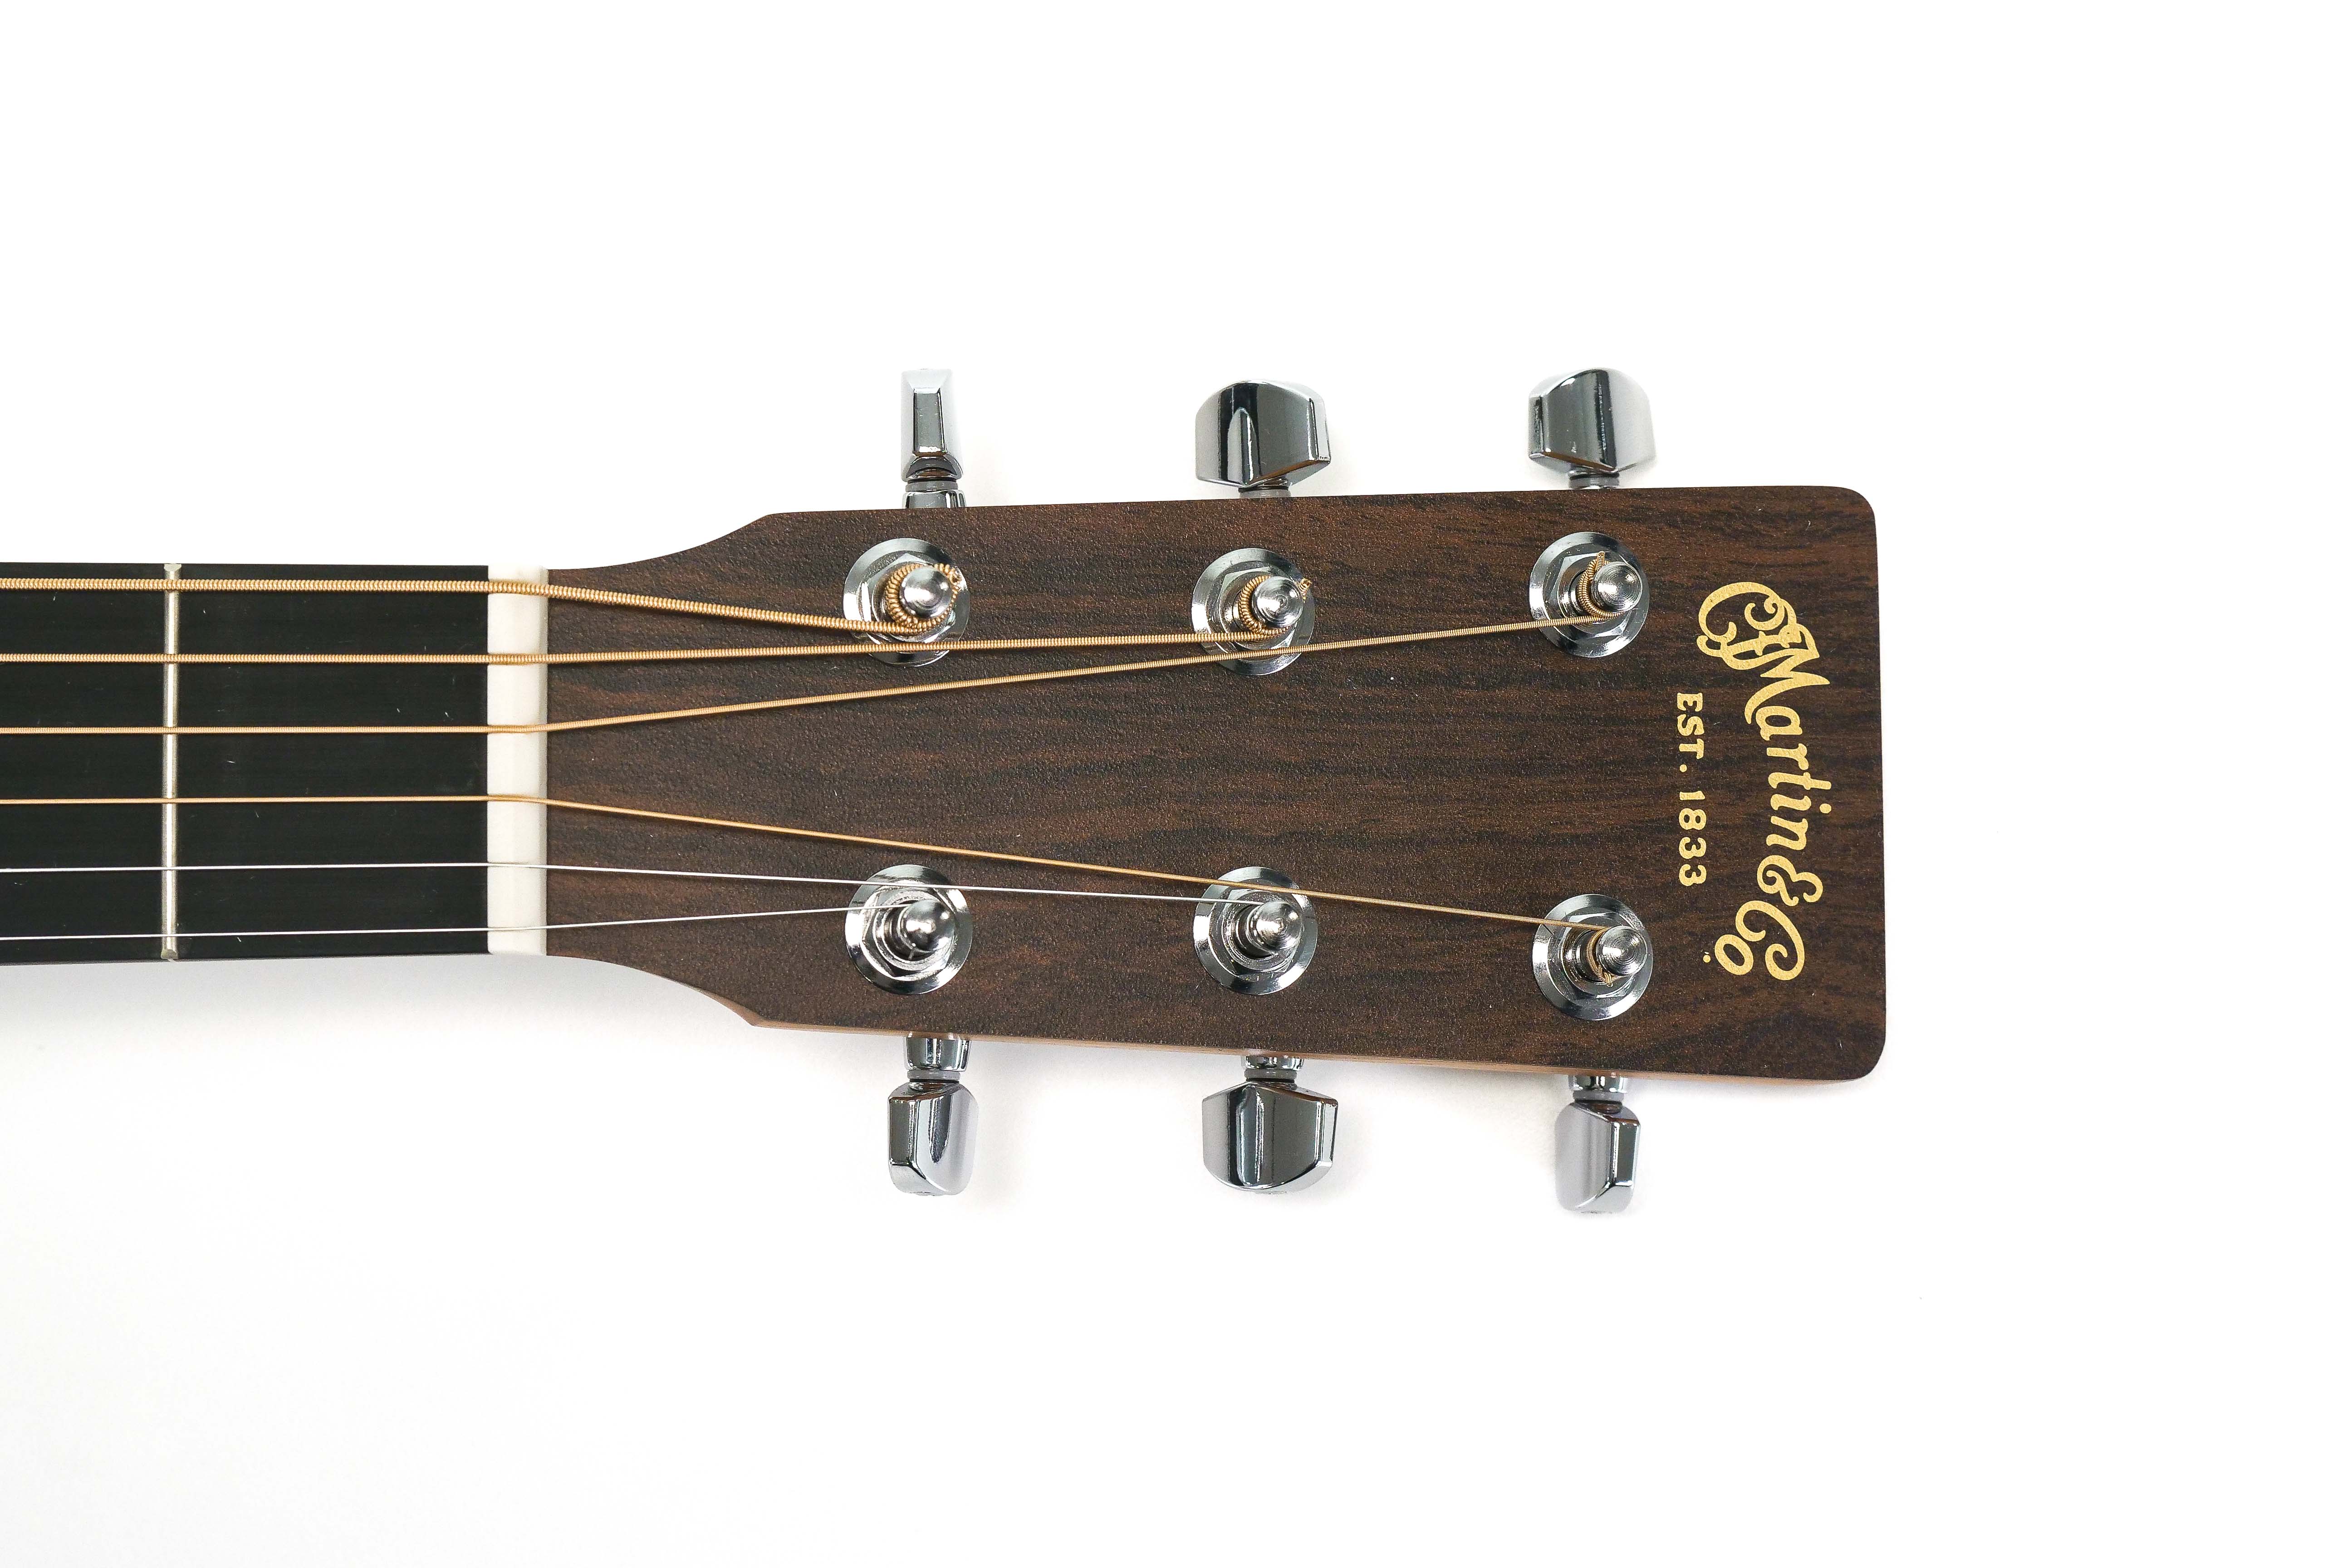 Solid Wood Acoustic Electric Guitar